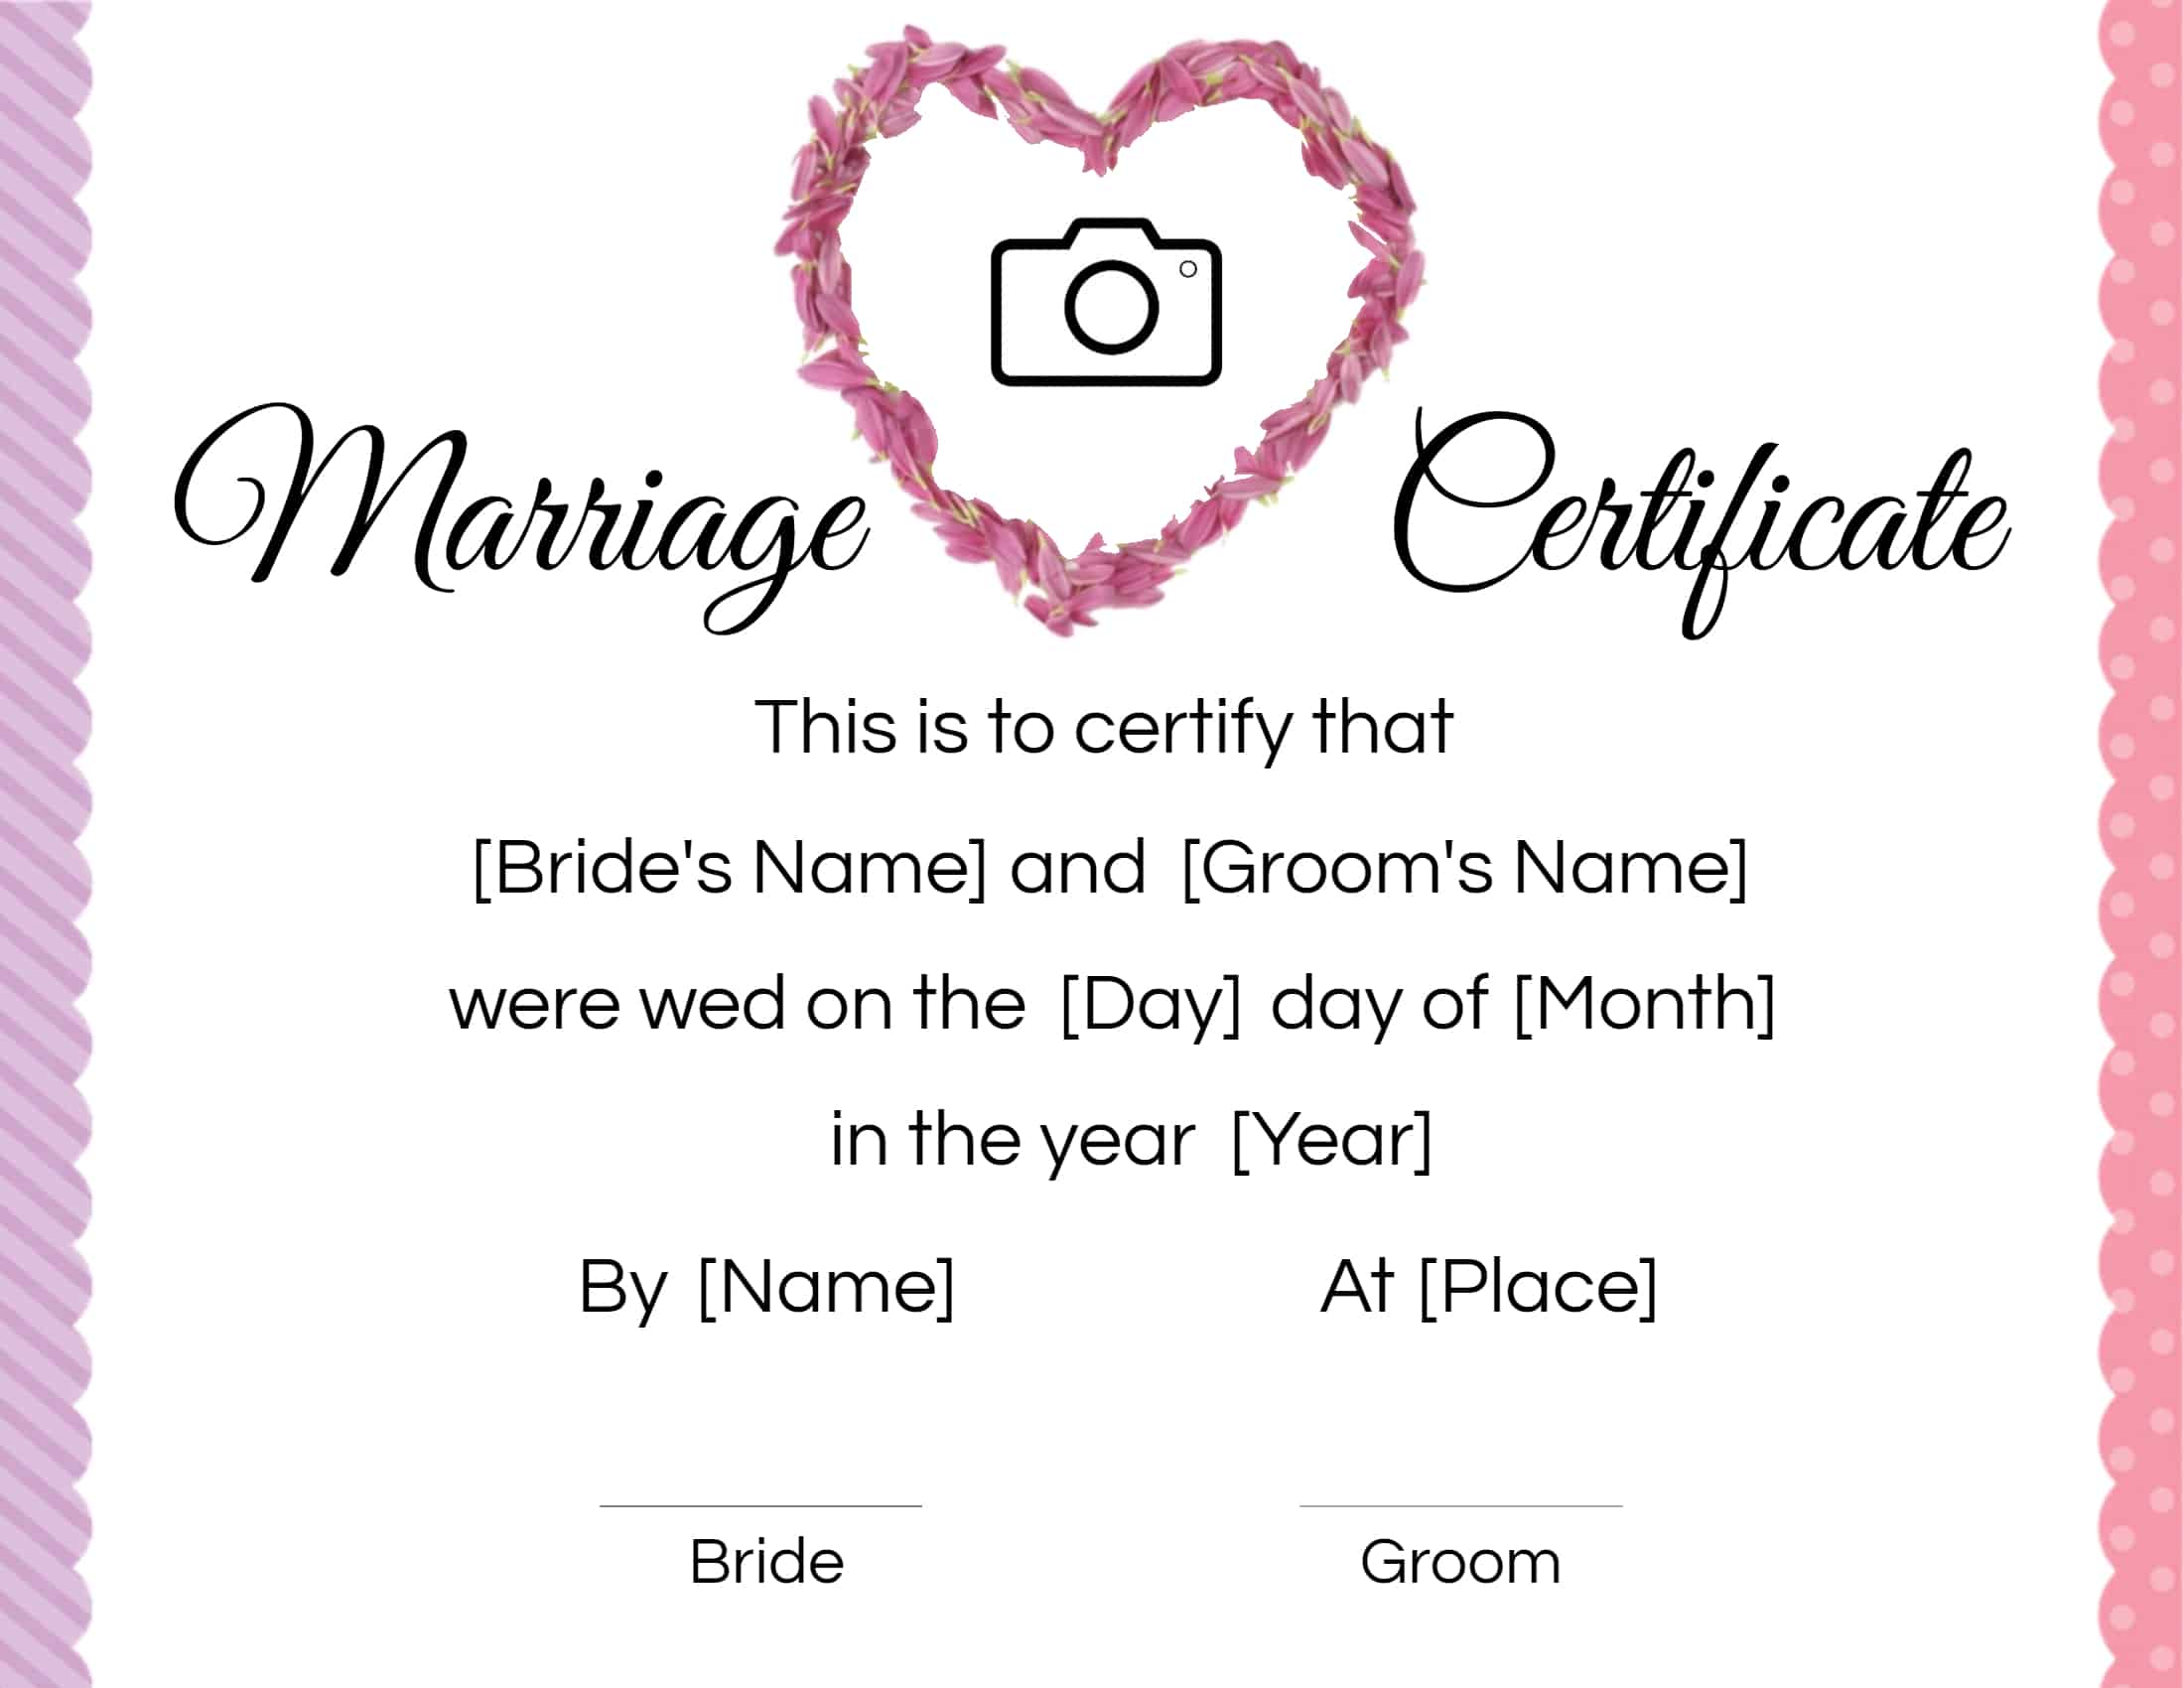 FREE Printable and Editable Fake Marriage Certificate